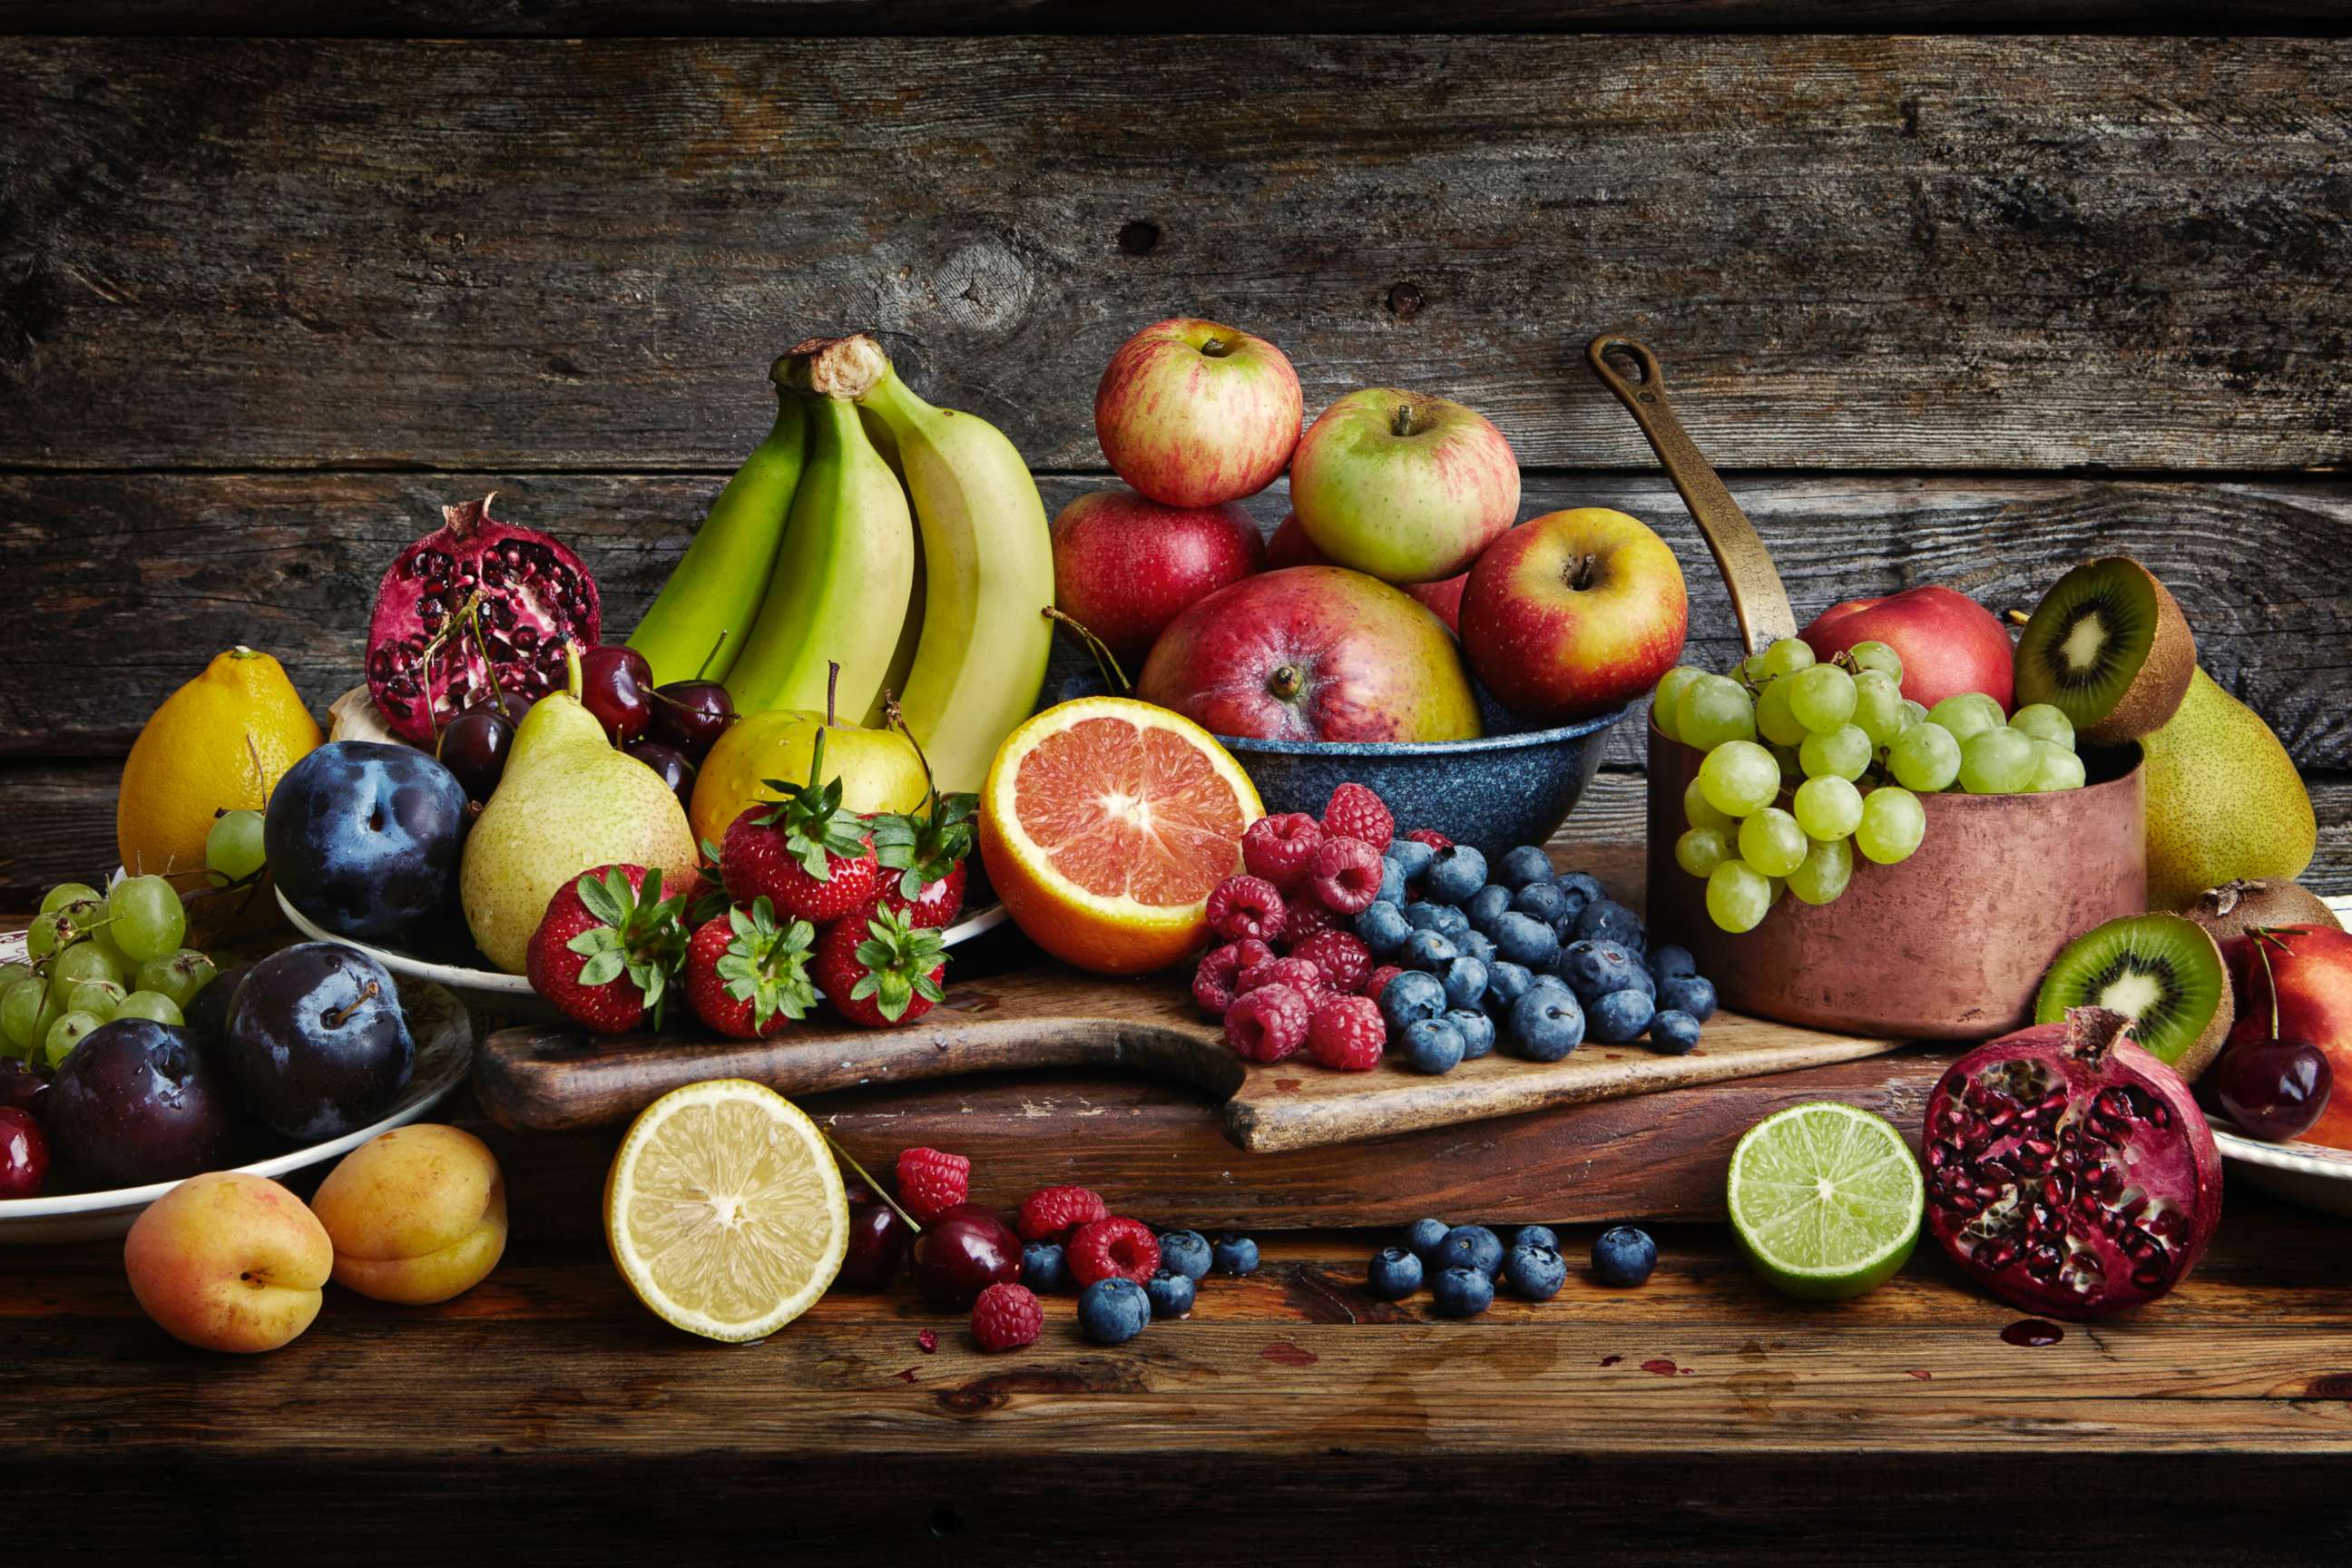 PHOTO: Assorted fruits are pictured in this undated stock photo.